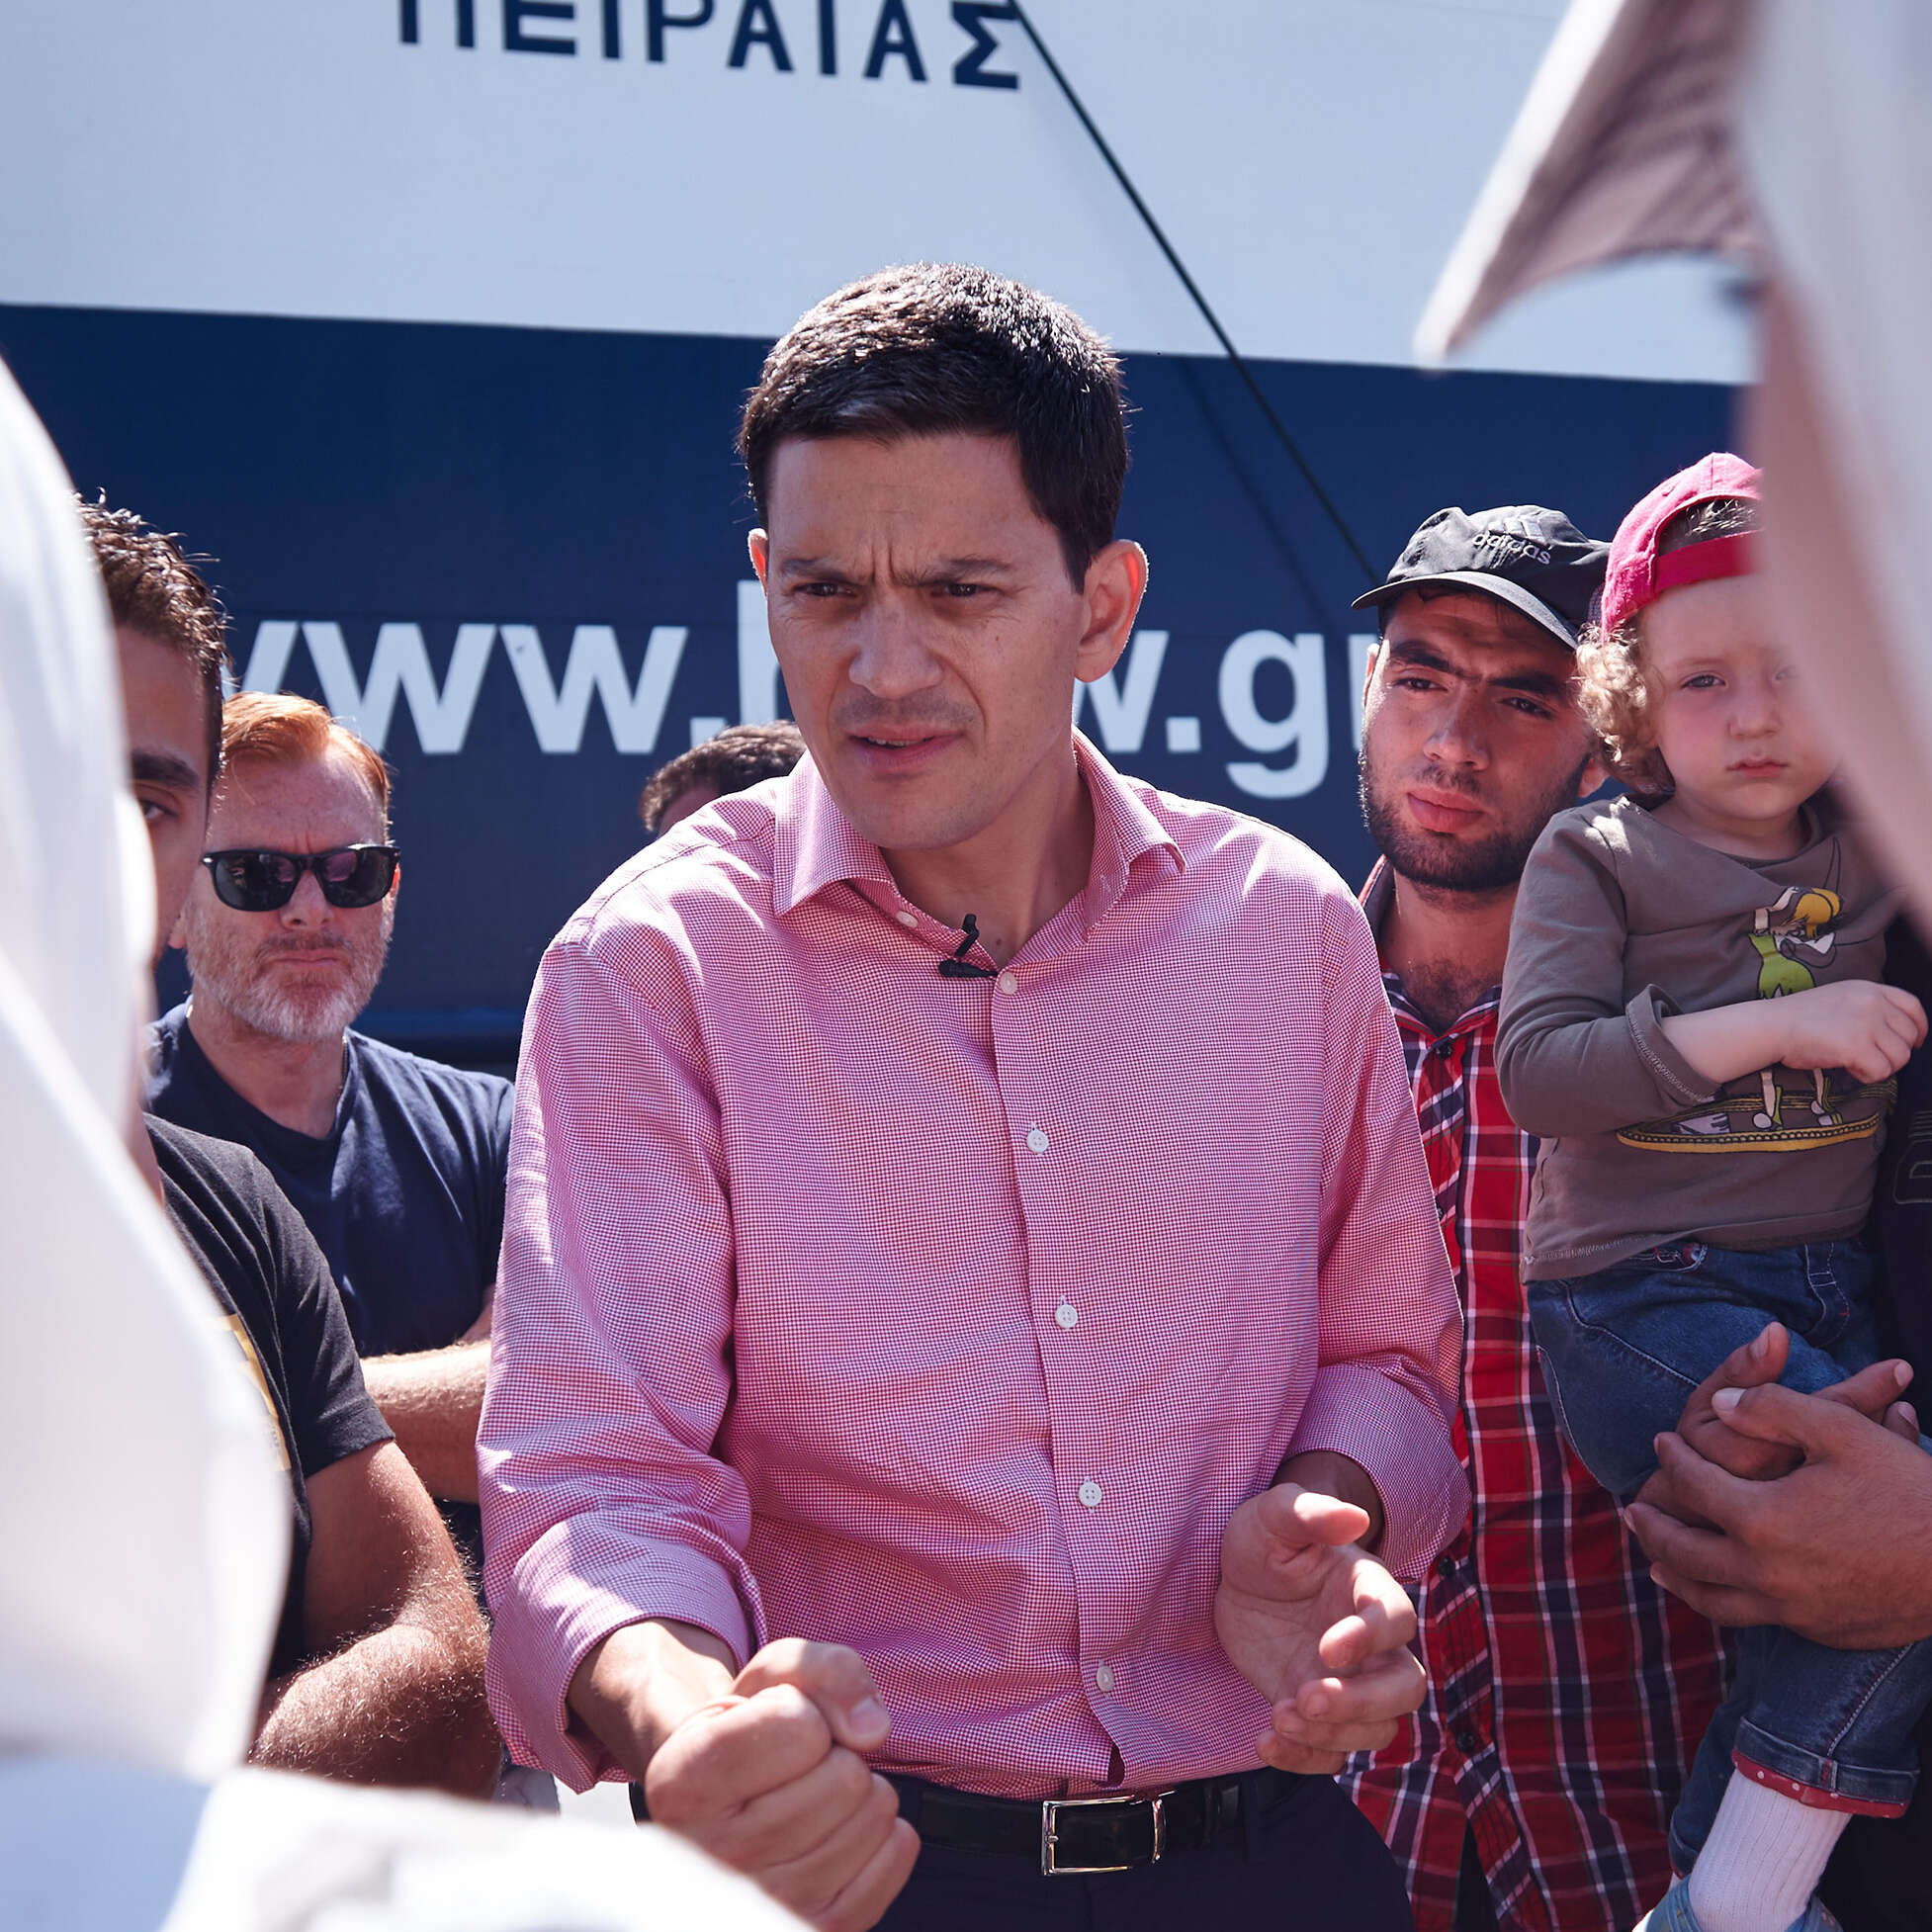 David Miliband in red shirt talking to a crowd